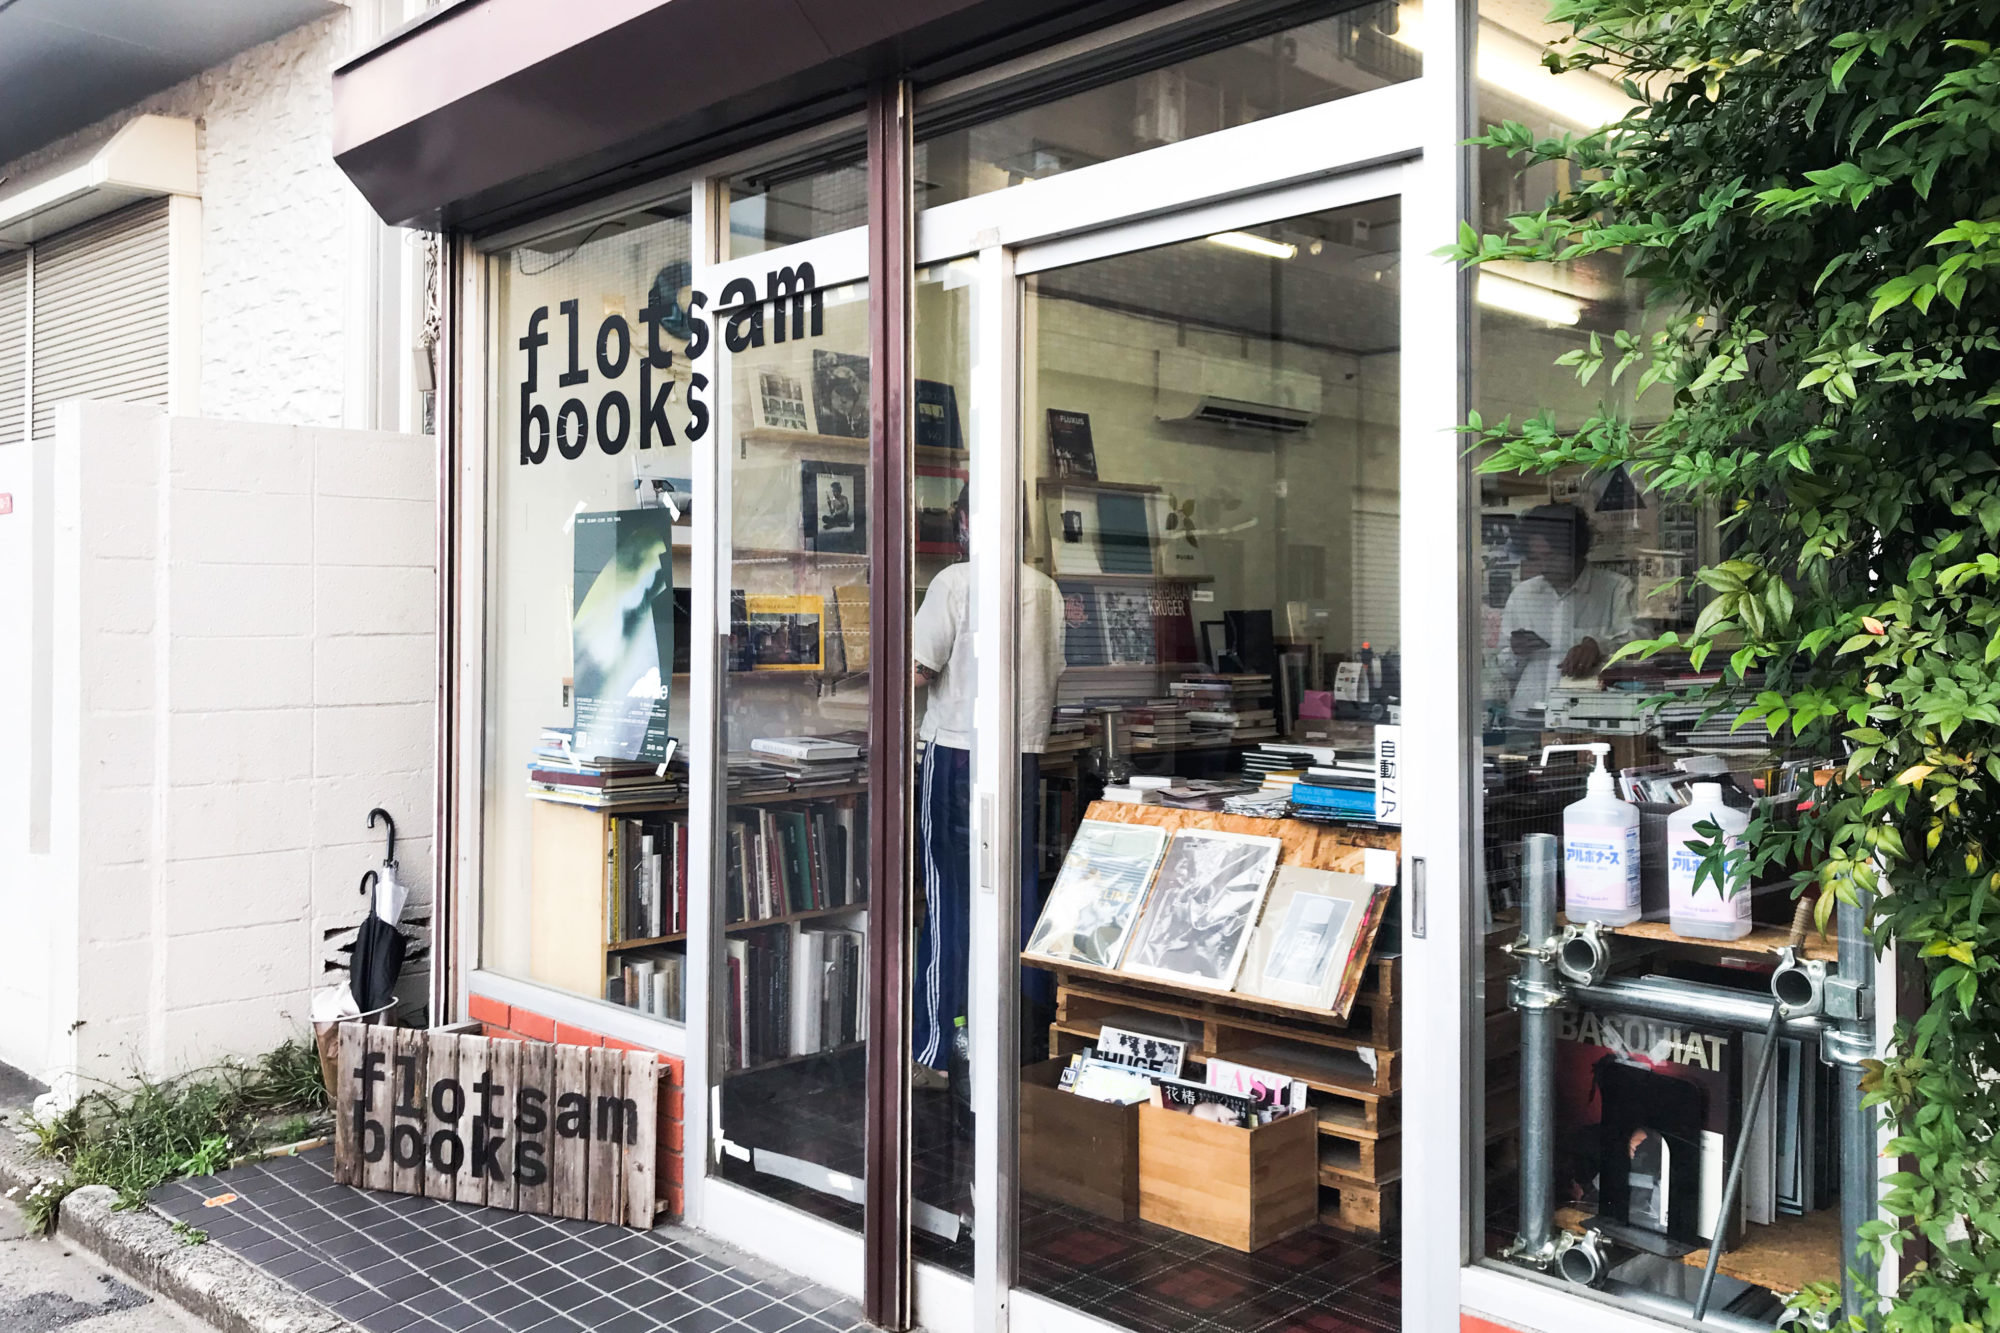 Independent Bookstore "flotsam books" Specializing in Art-related Publications